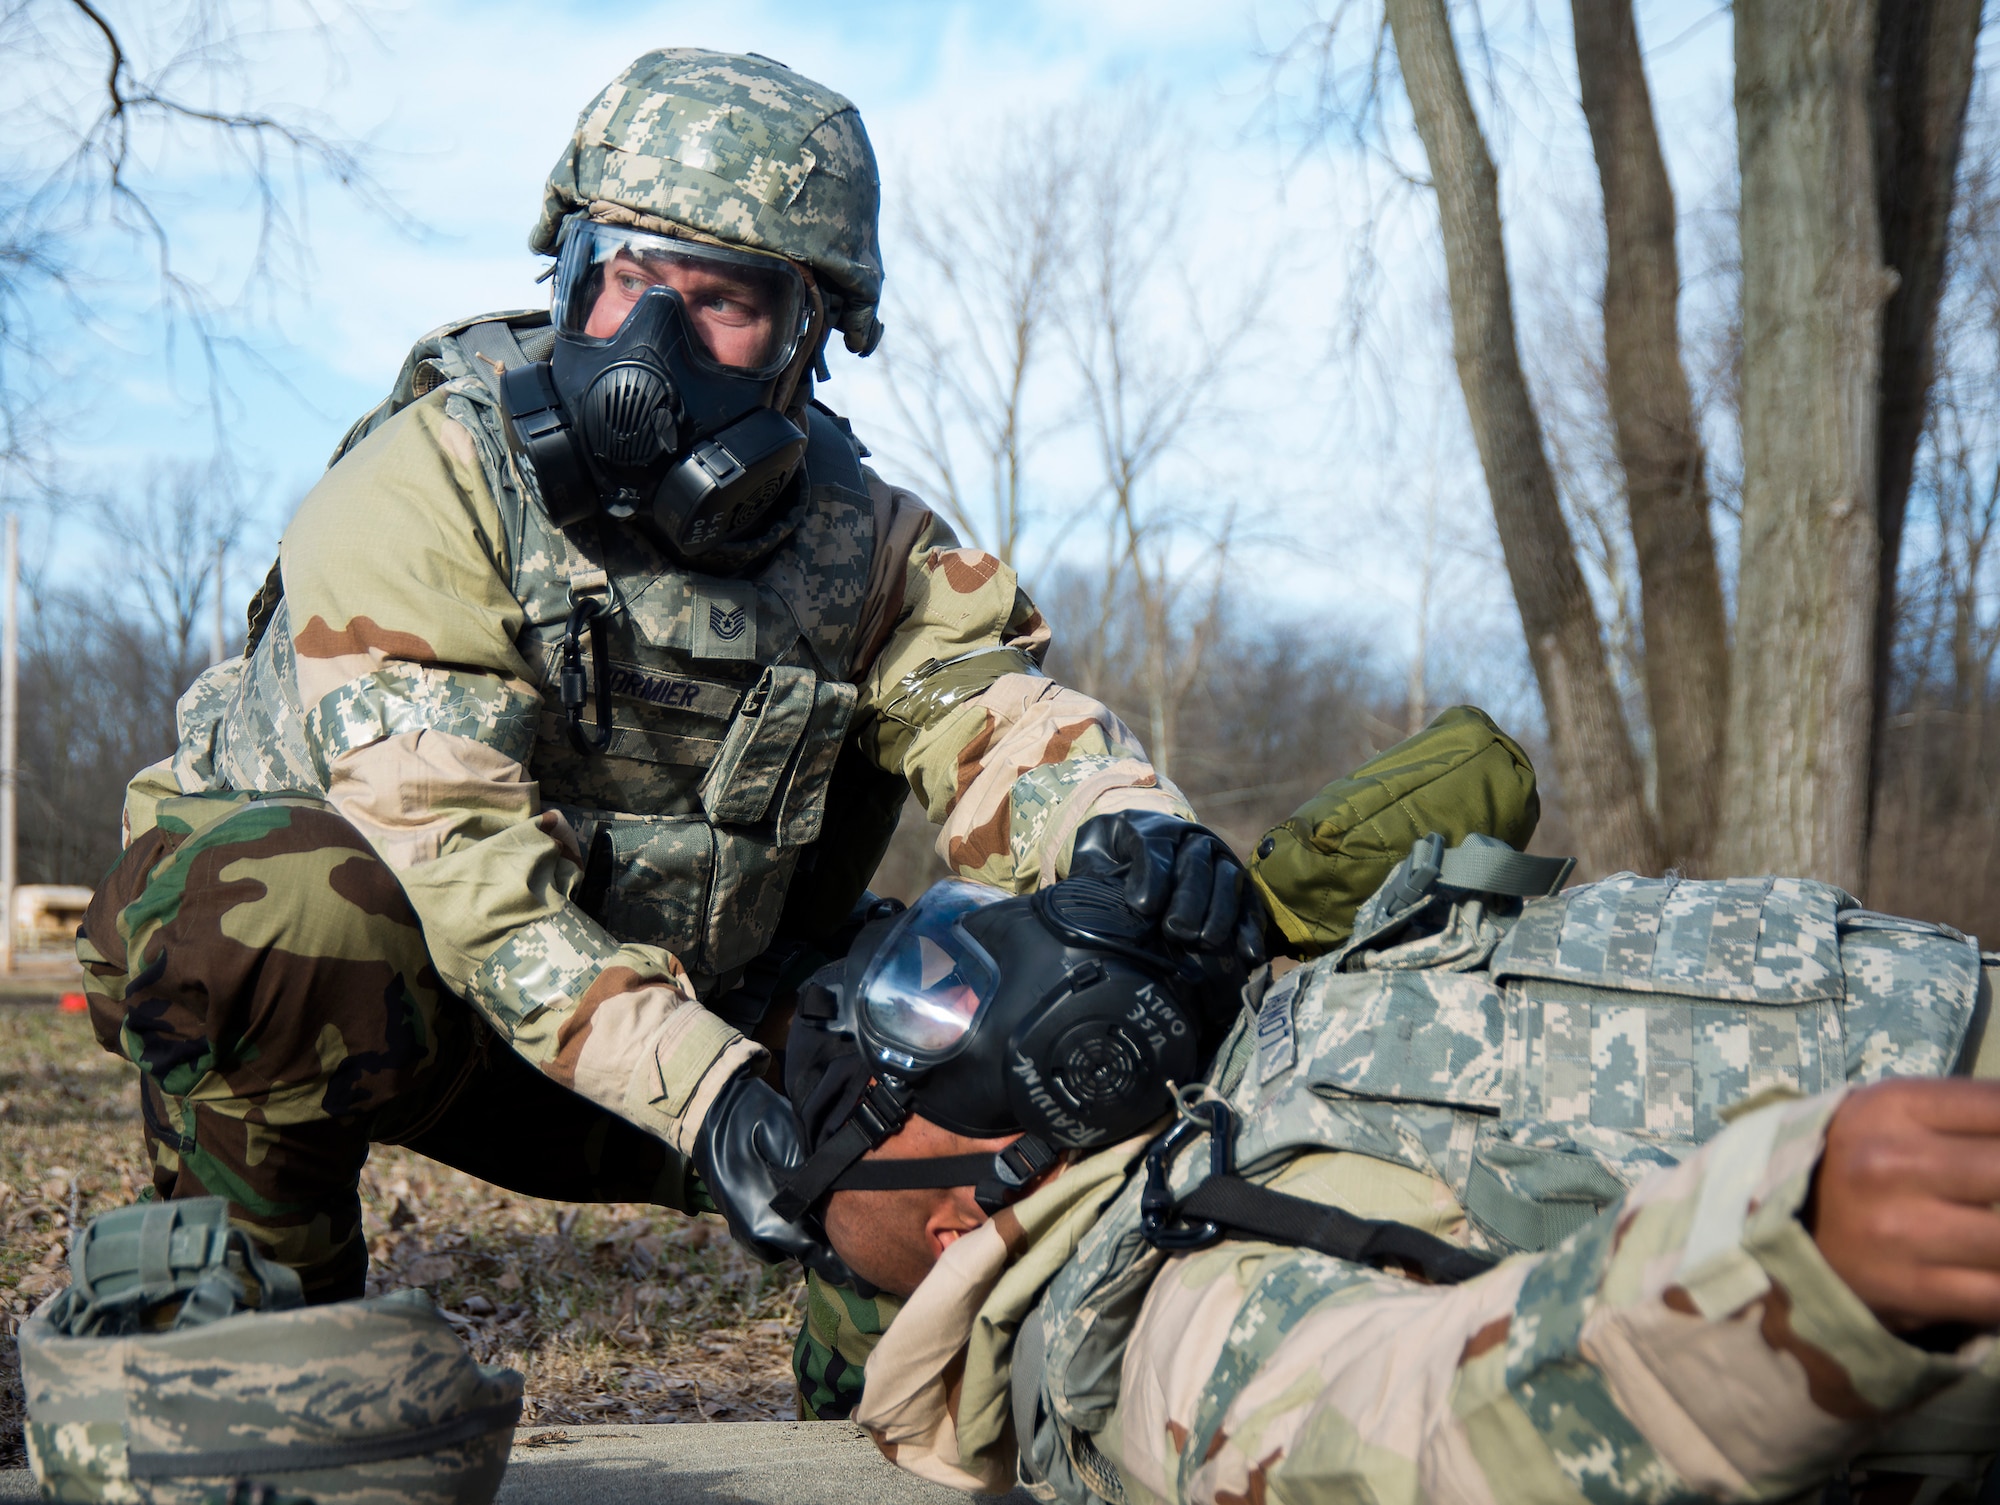 Tech Sgt. Matthew Cormier, 88th Security Forces Squadron, renders assistance to Senior Master Sgt. Himaiya Lowery, 88th SFS, Jan. 31, 2018, during a simulated chemical attack as part of an exercise on Wright-Patterson Air Force Base, Ohio. Part of the exercise was designed to train Airmen in how to protect themselves and aid others in a high-threat environment. (U.S. Air Force Photo by R.J. Oriez)